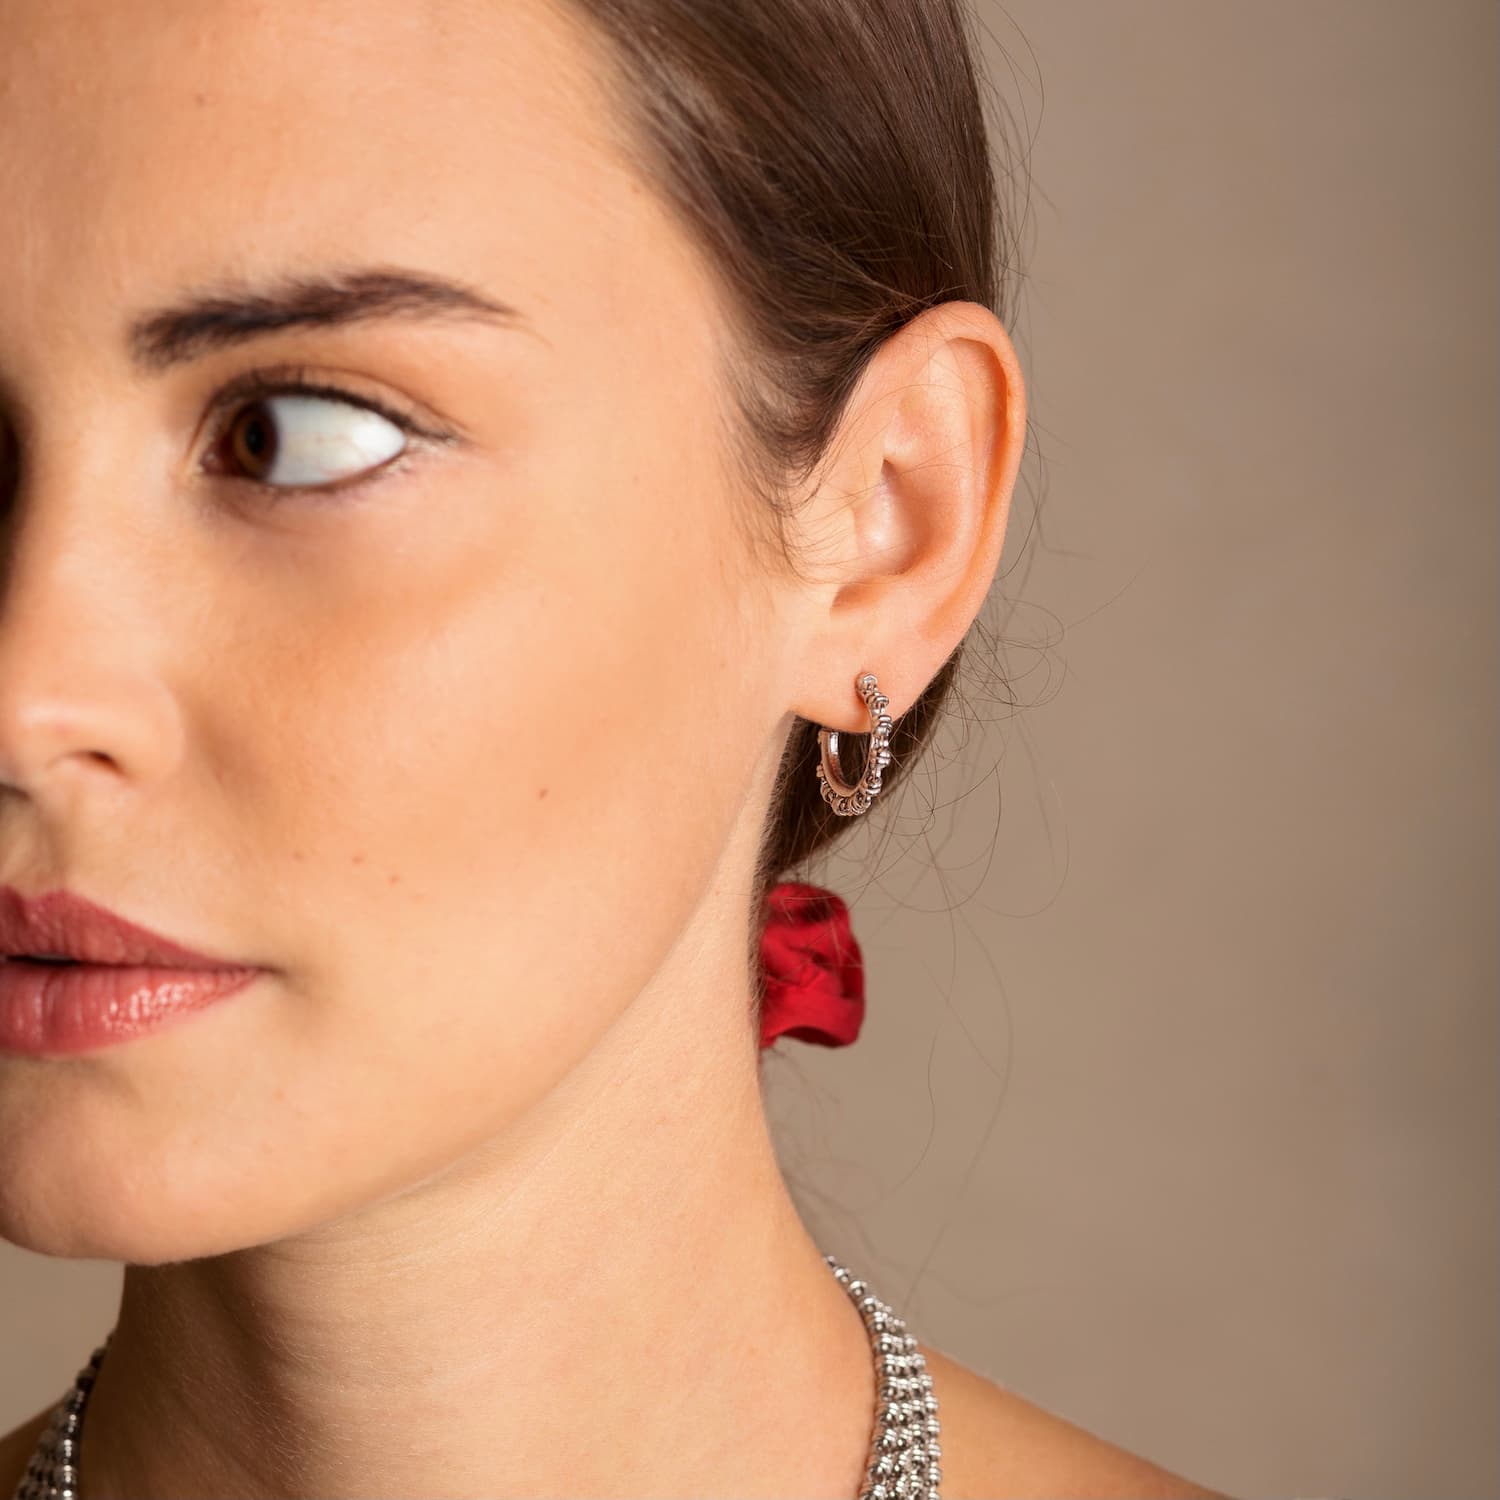 A closeup of a model wearing silver hoop earrings designed and hand-crafted by DelBrenna Italian Jewelers in Tuscany. The earrings and necklace shown here are designed based on the iconic Links collection of DelBrenna silver chains, necklaces, rings, and bracelets. 